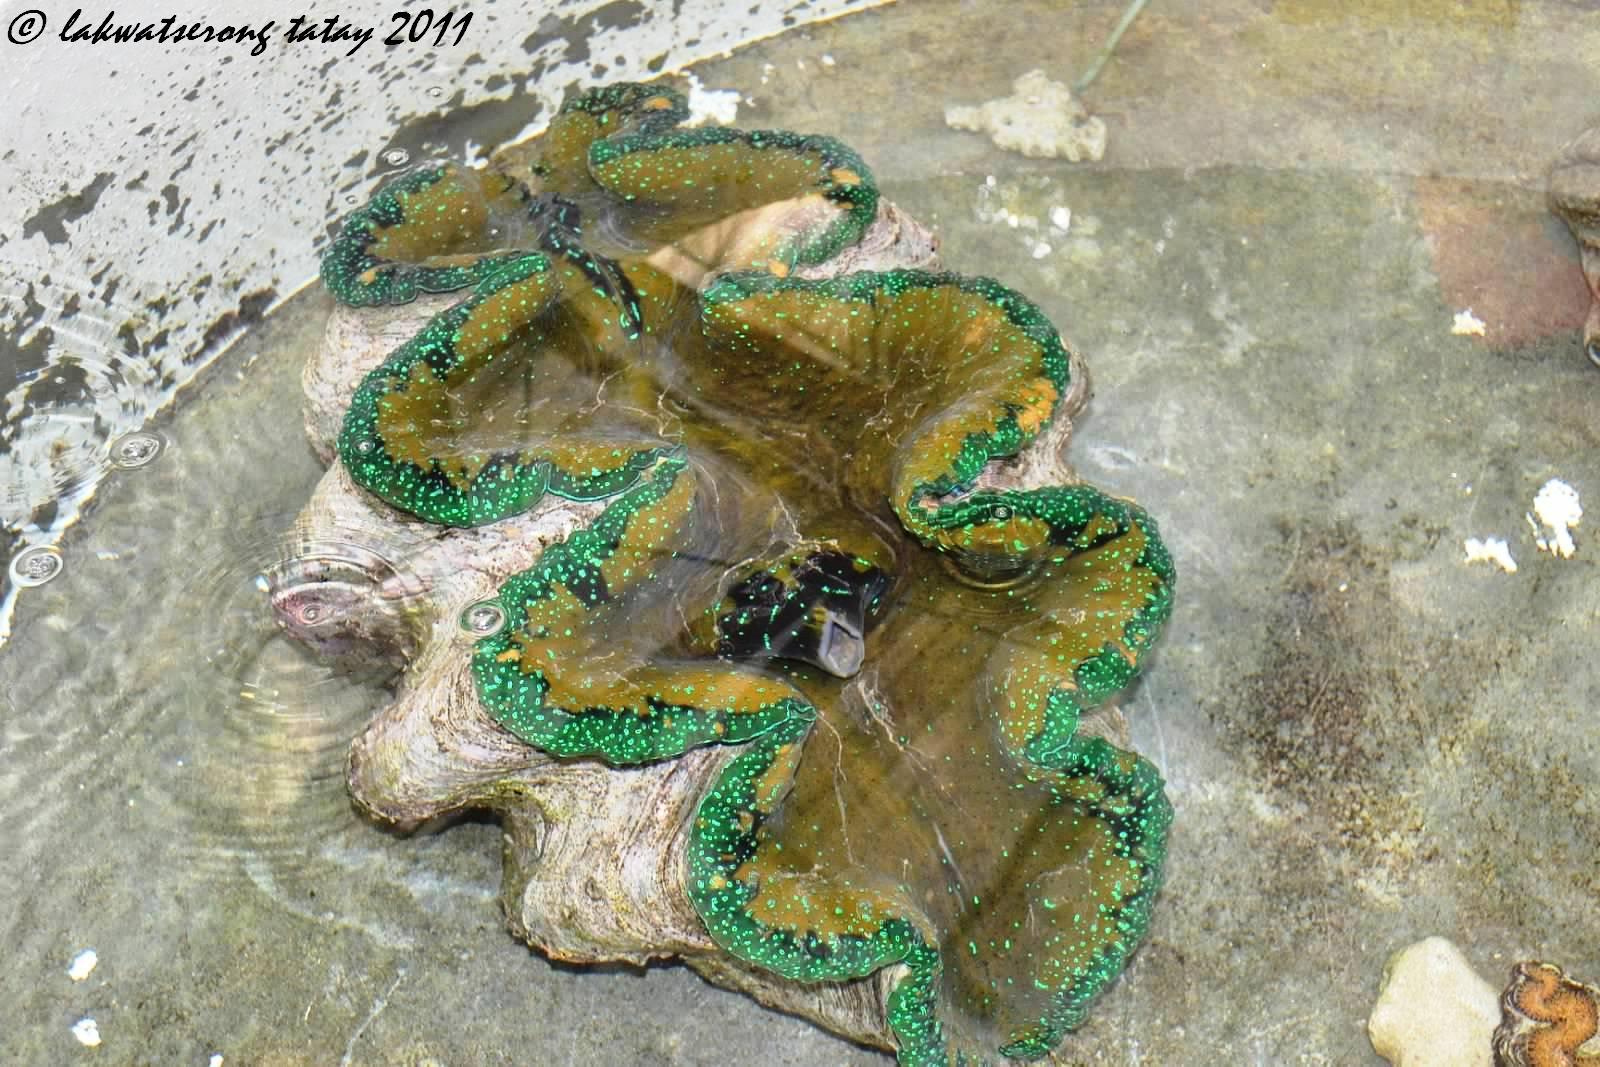 The Giant Clam Sanctuary of Camiguin